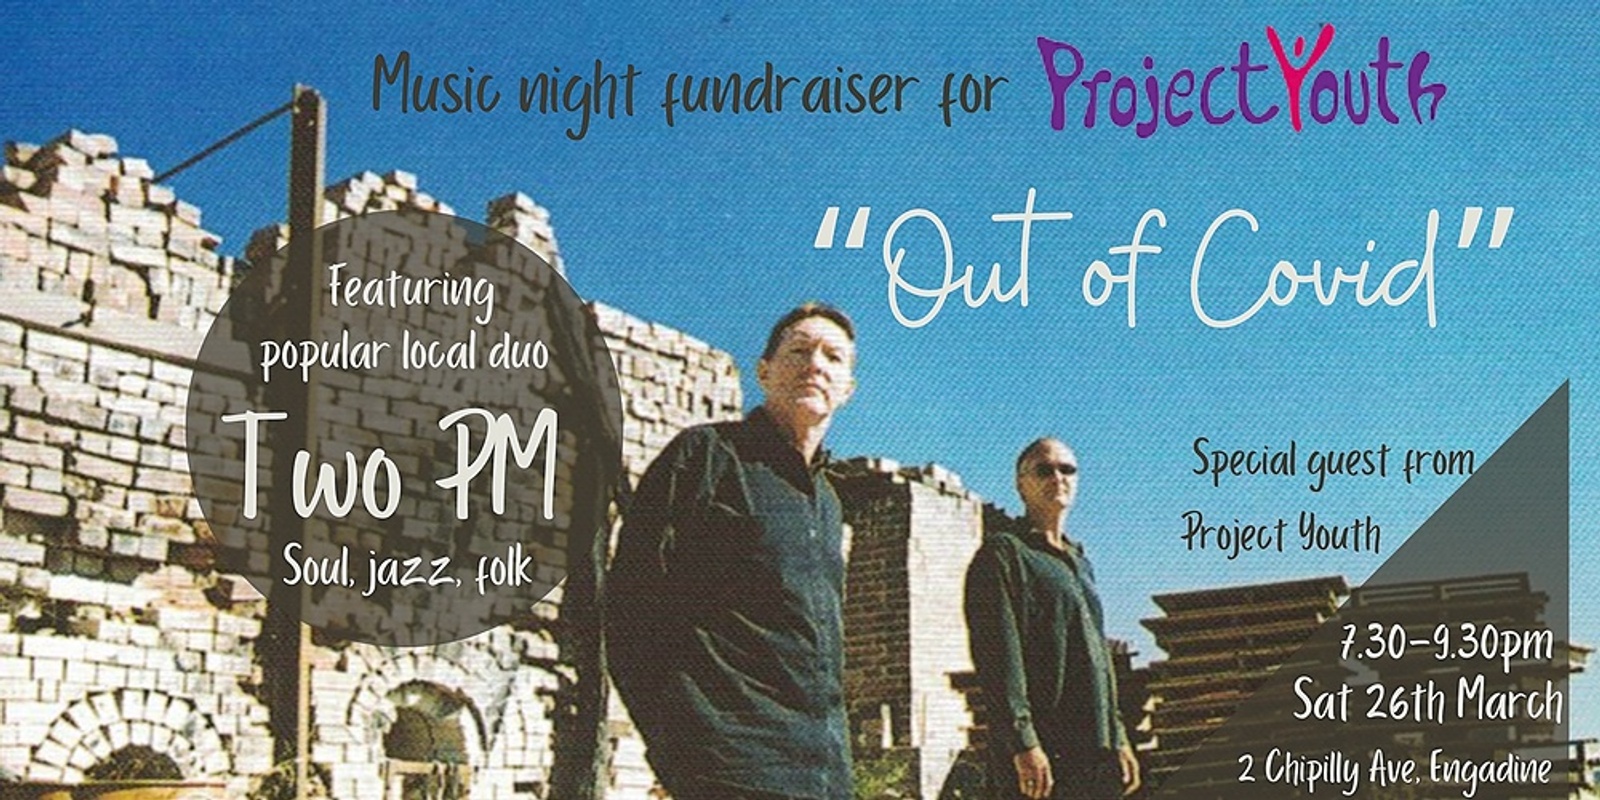 Banner image for “Out of Covid”: a musical fundraiser for Project Youth